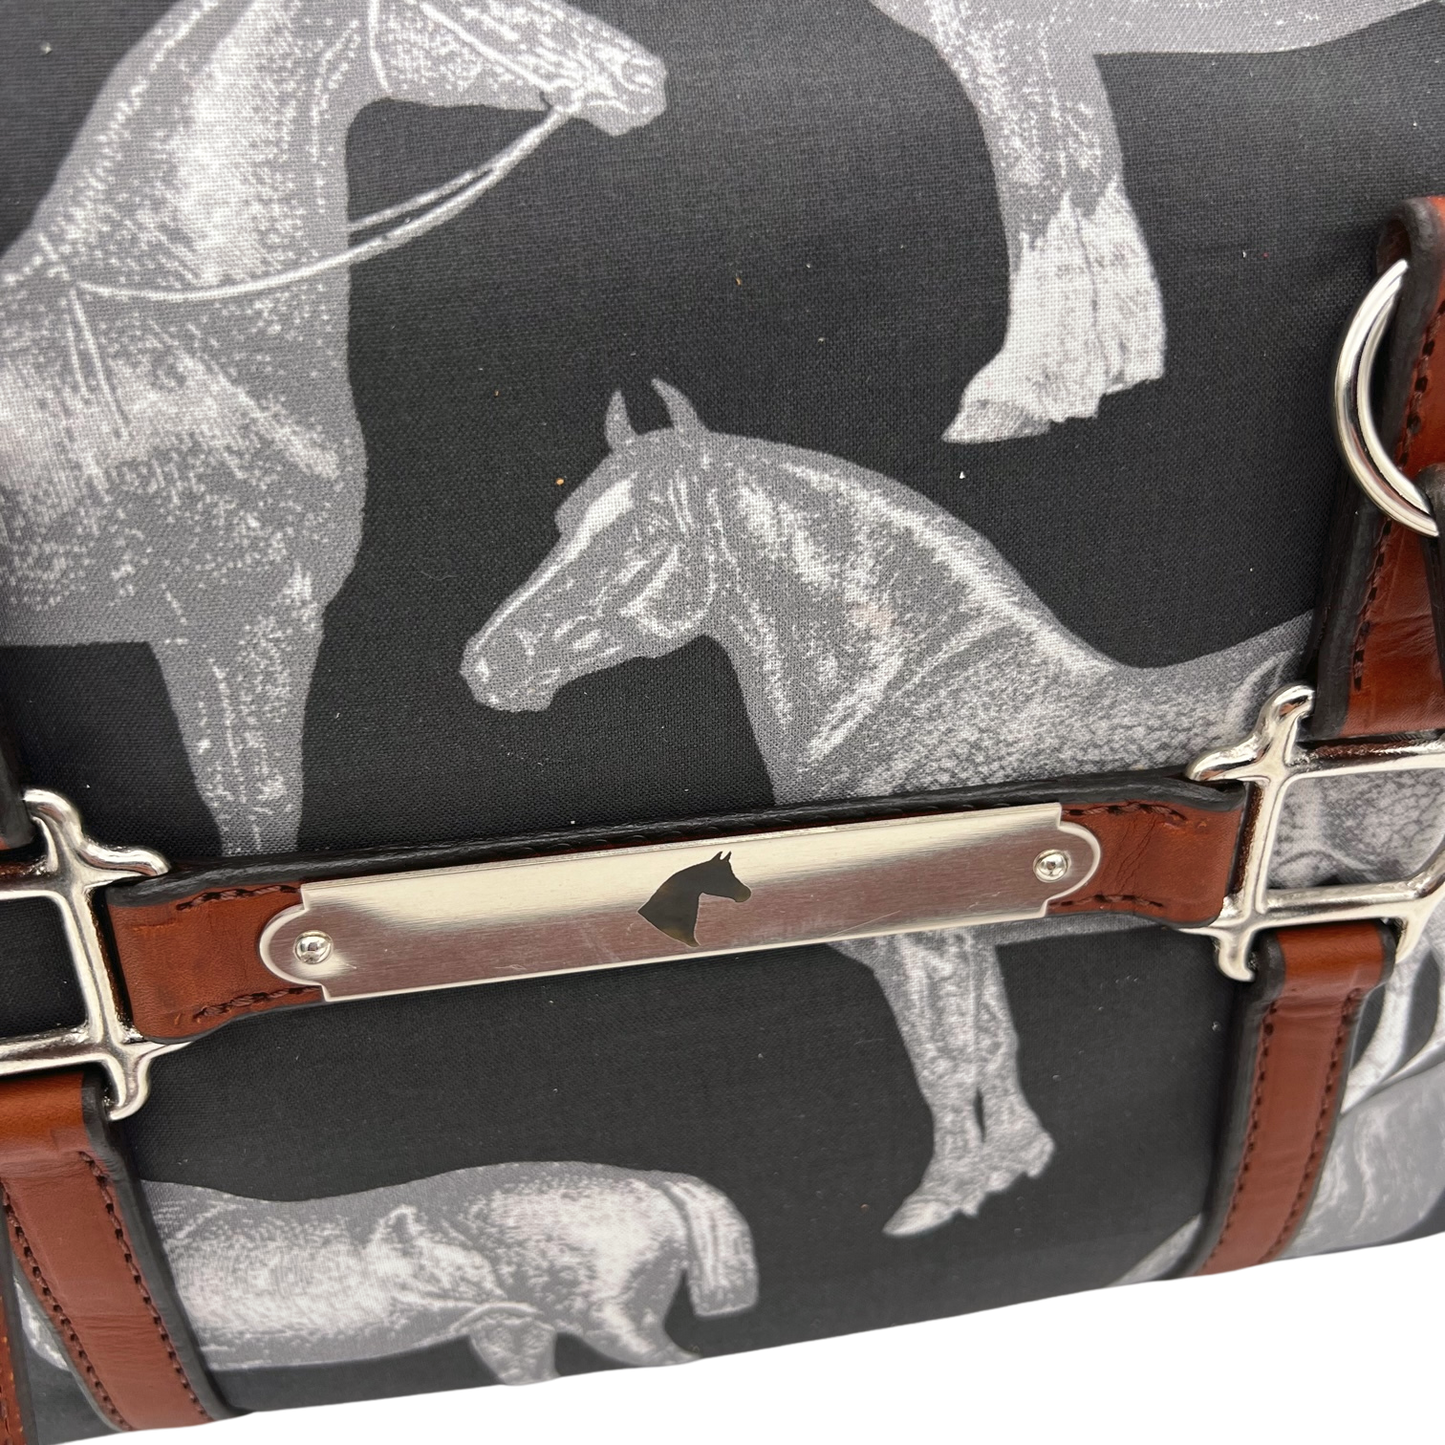 Stable Satchel in Equus - 3 color options